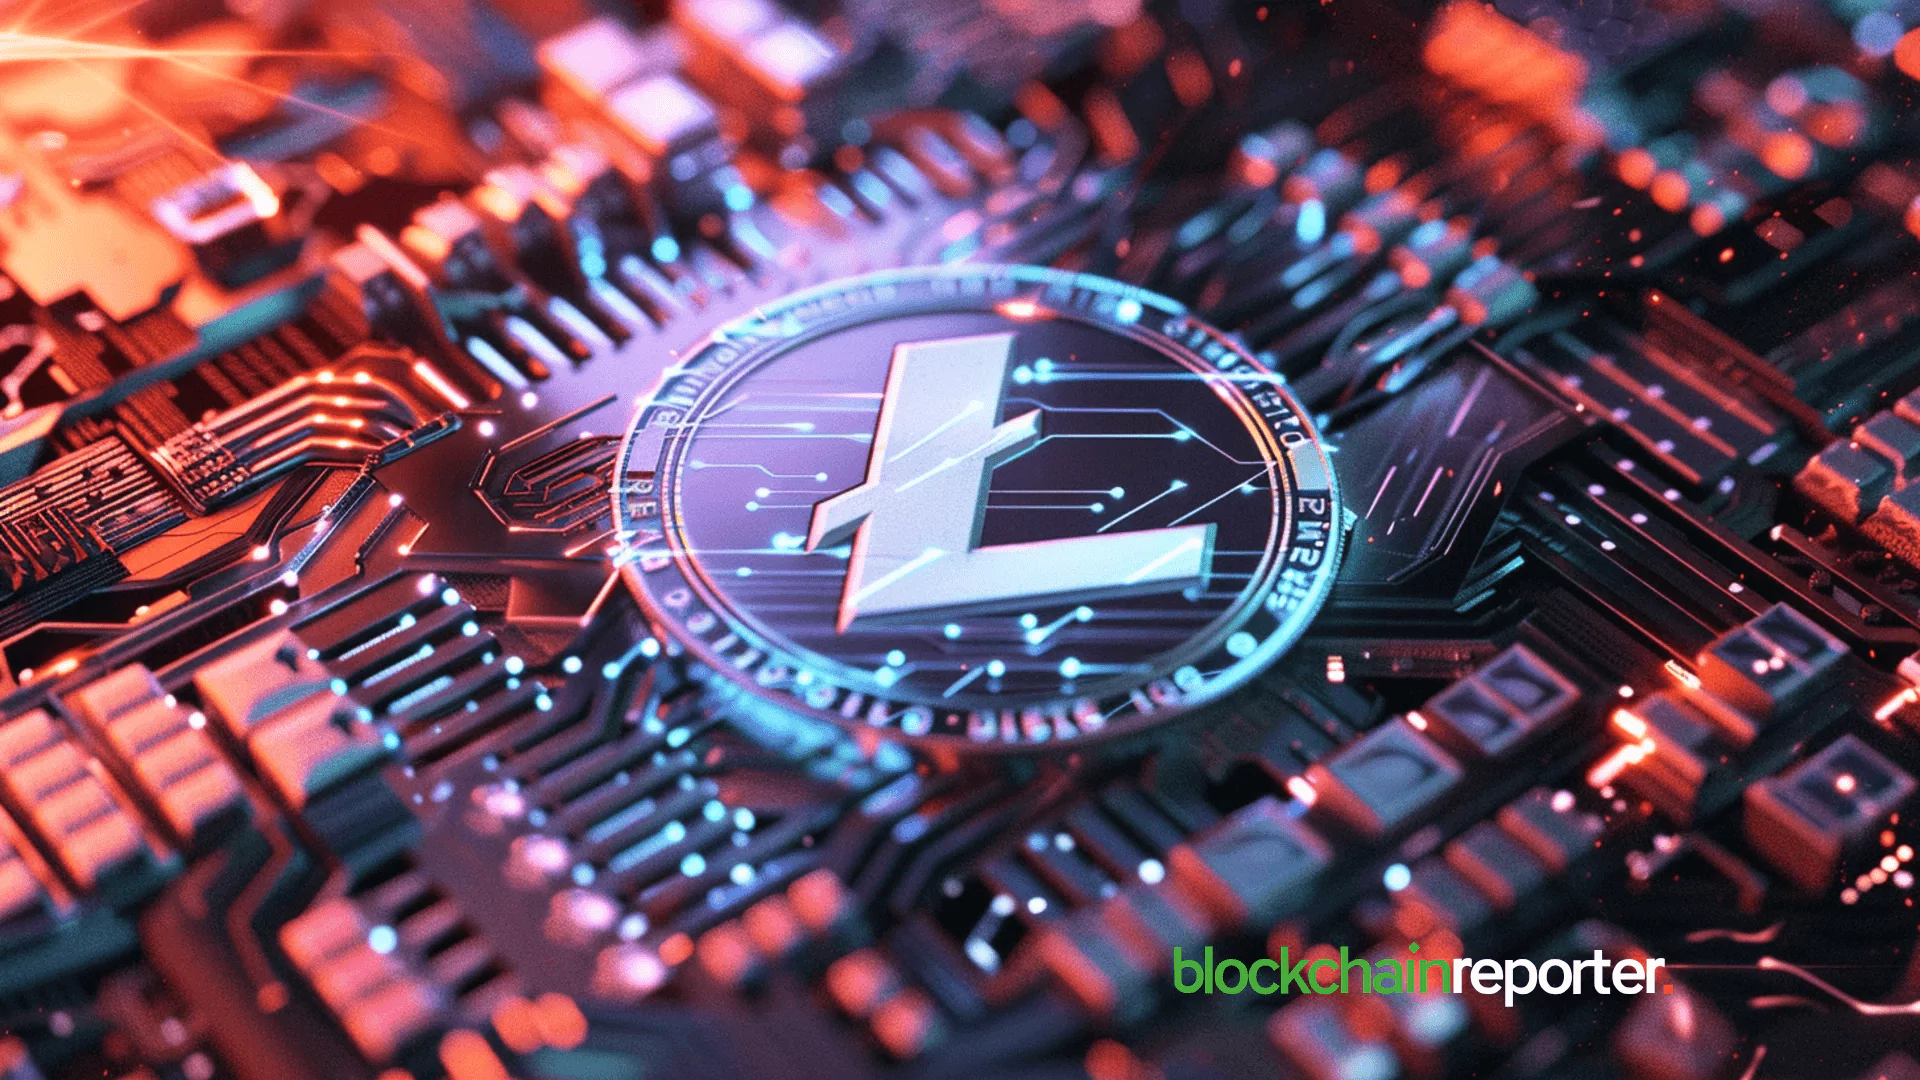 Is Litecoin the Dark Horse of Crypto? Leading in Blockchain Activity But Not in Price